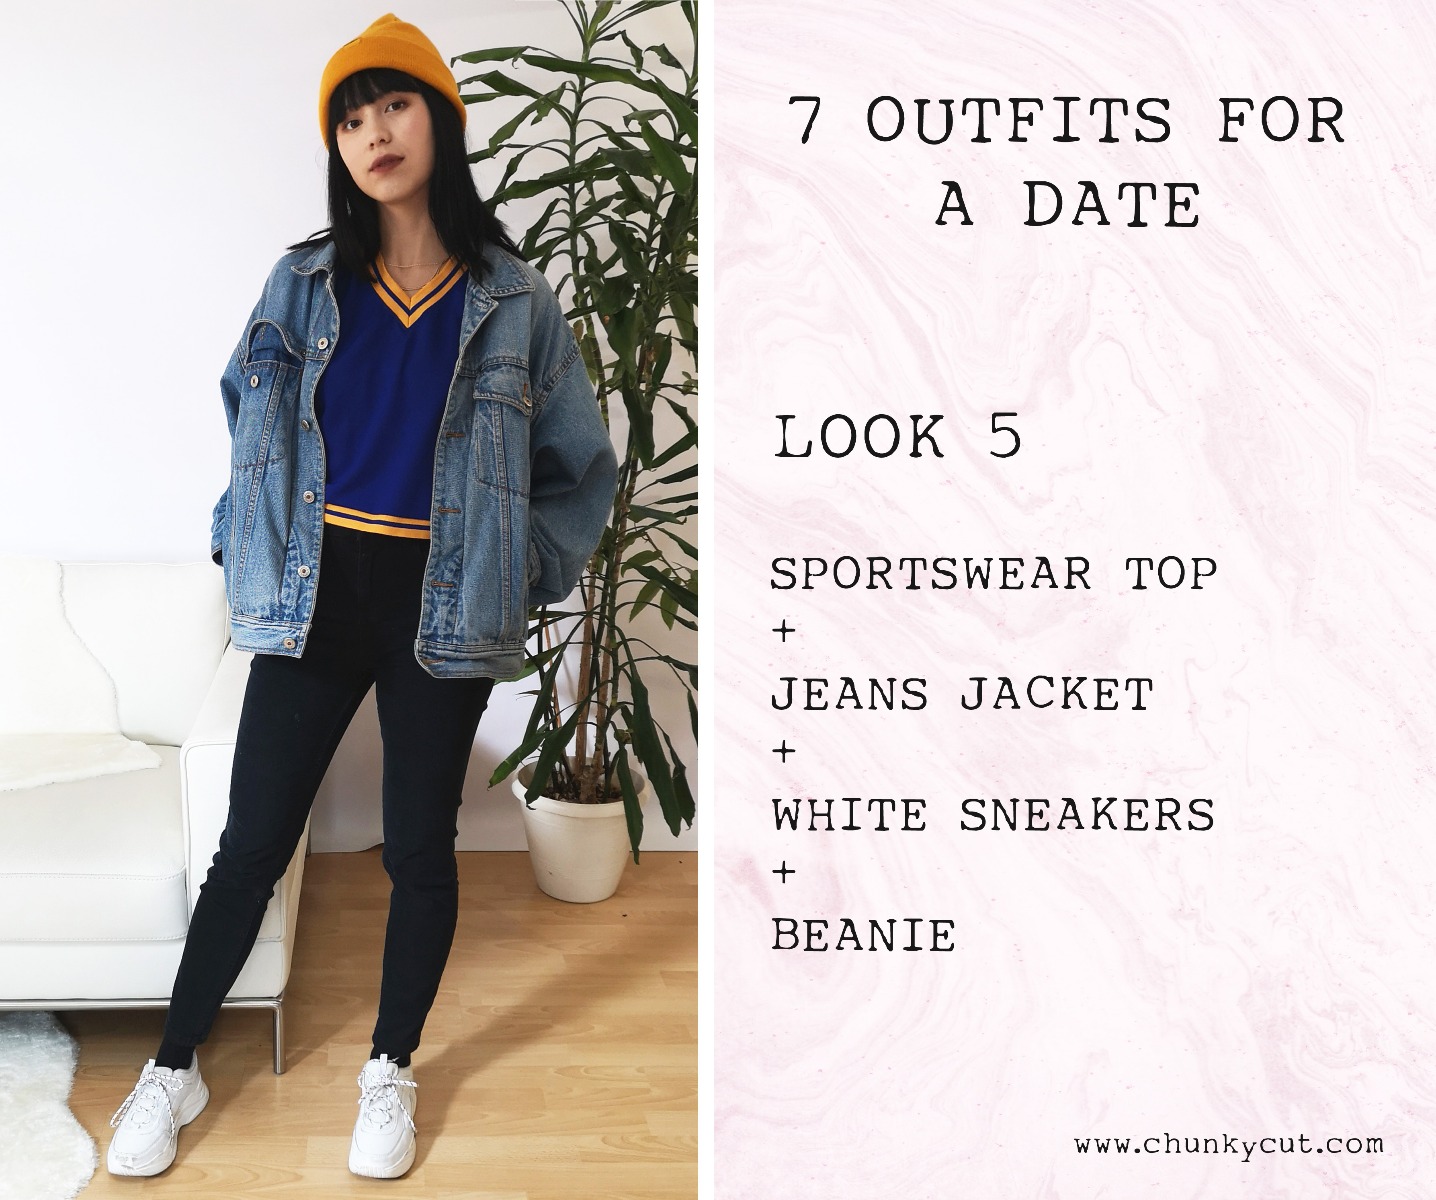 Look 5 with sportswear top, jeans jacket, black skinny jeans, white sneakers and a yellow beanie